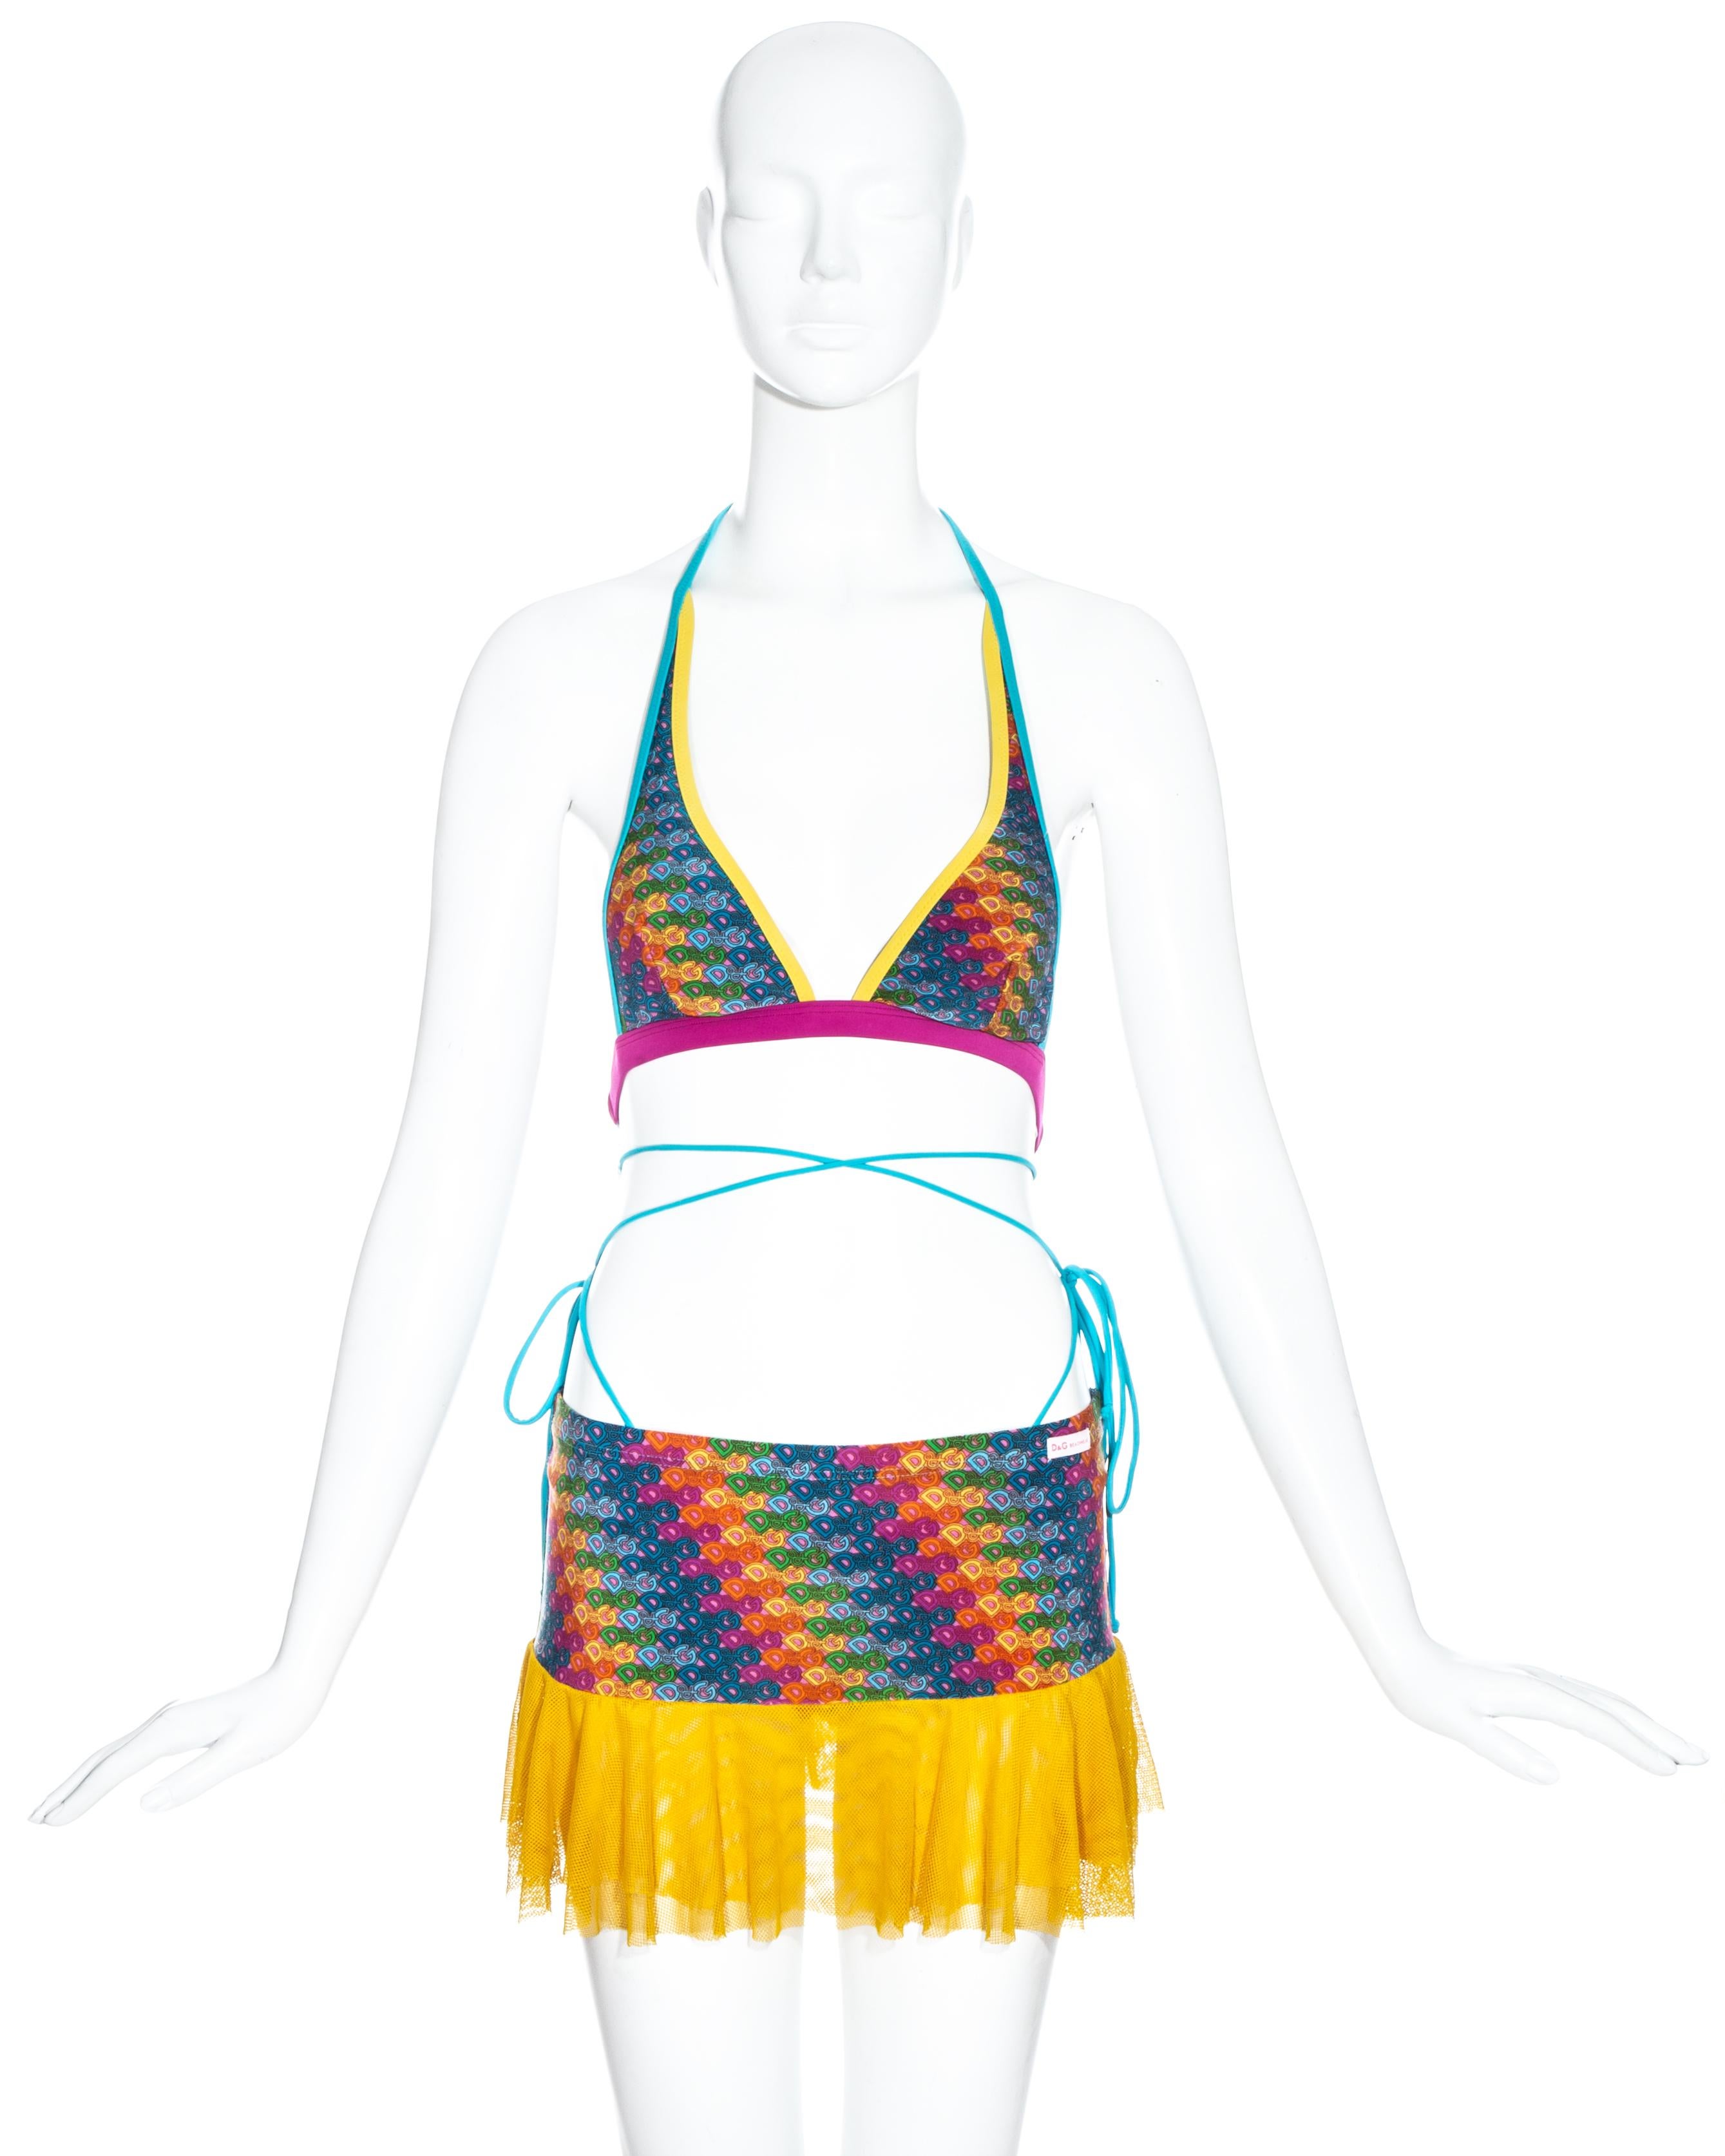 D&G multicoloured monogram bikini with long string fastenings, sold with matching micro mini skirt. 

c. 2000